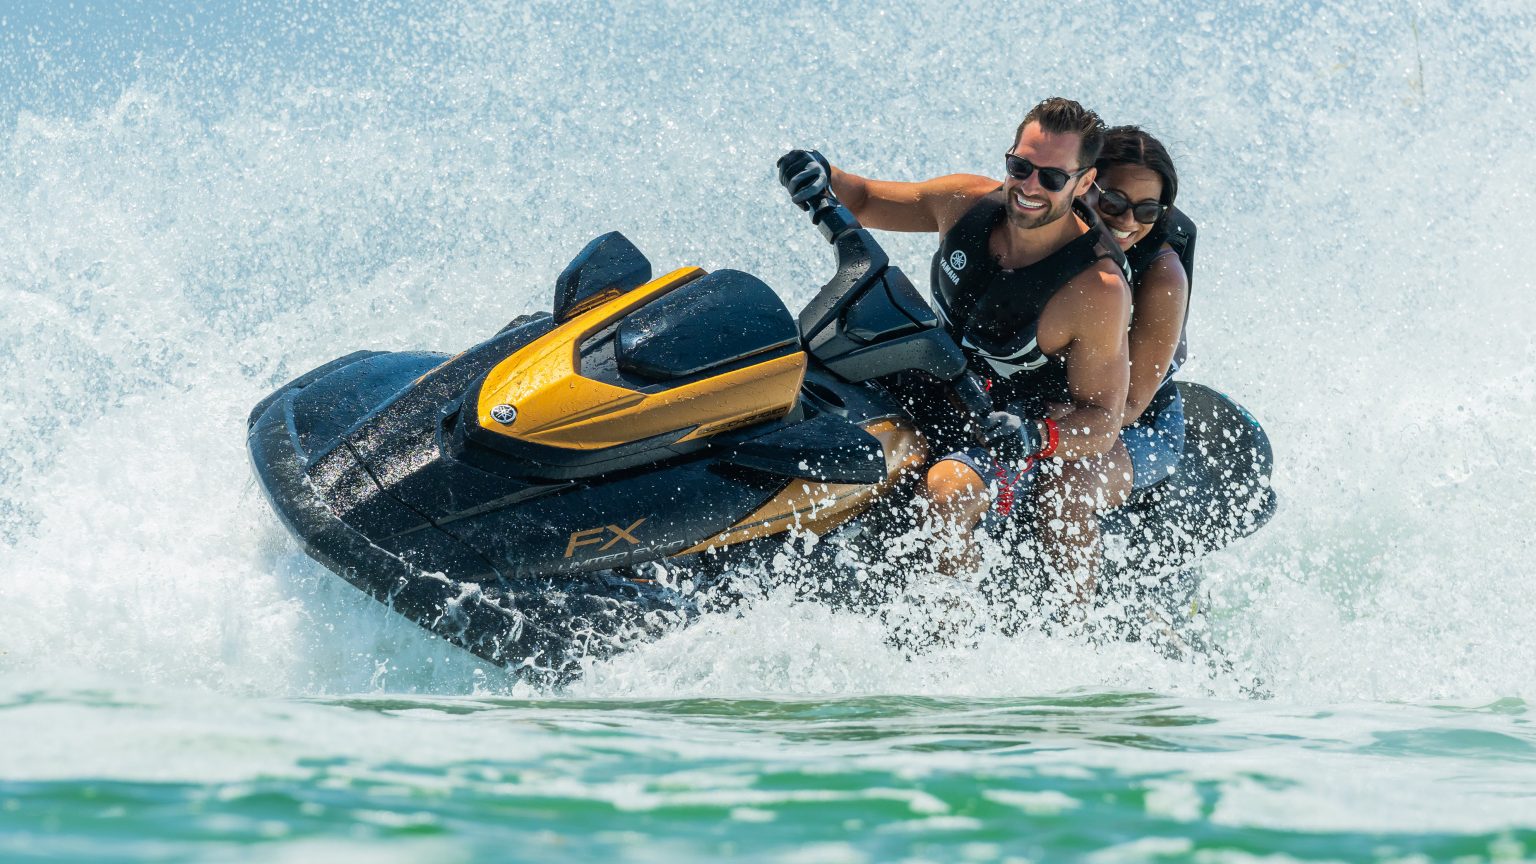 2024 Yamaha WaveRunner prices and model changes